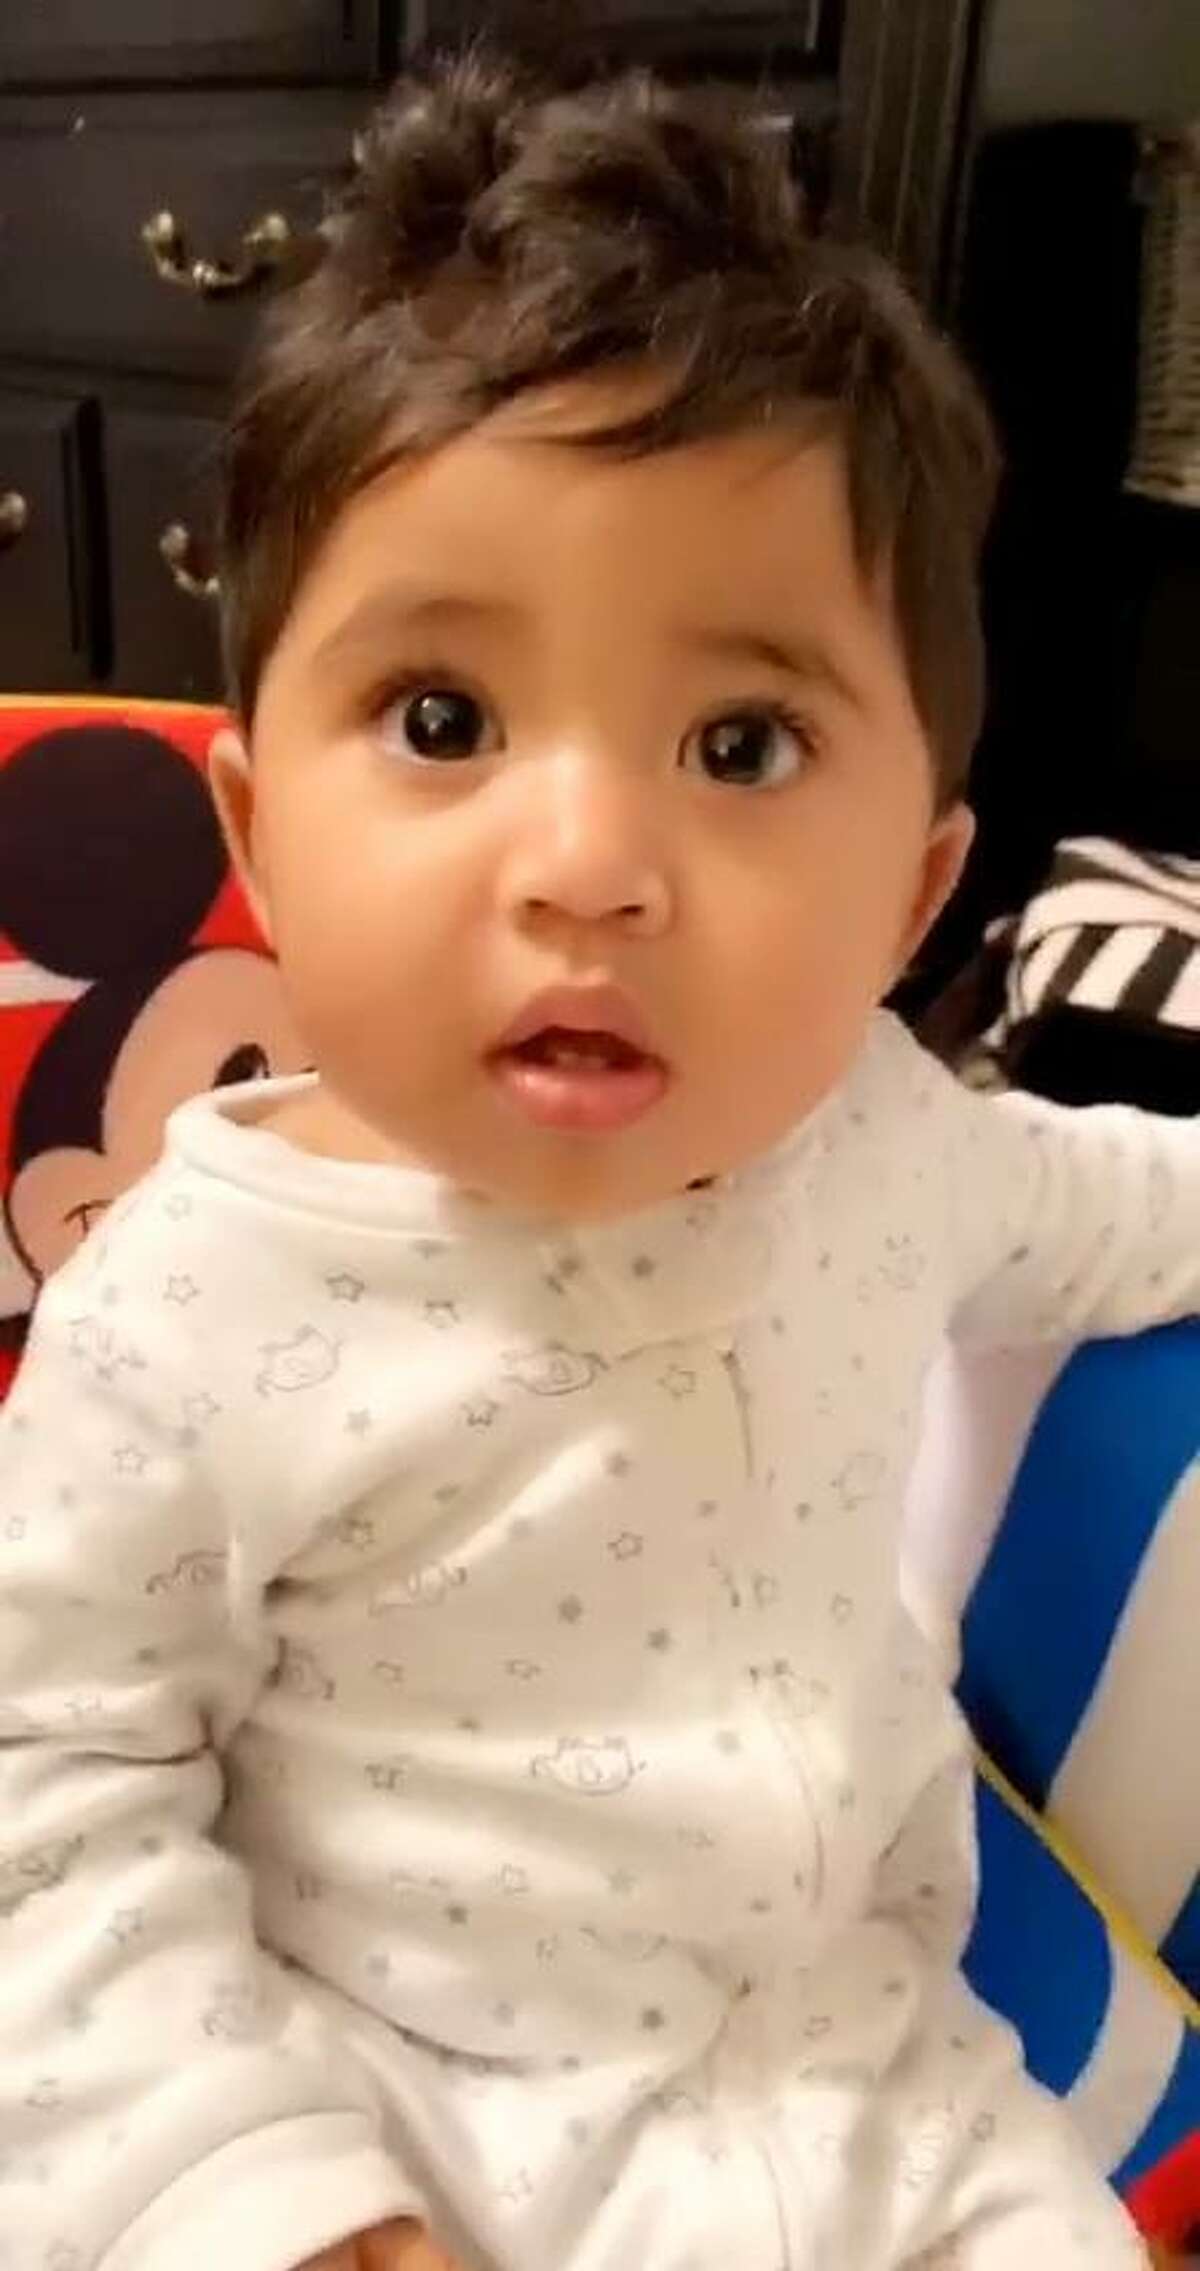 Nick Torres, 10 months, was found unconscious and unresponsive in a bathtub and later declared brain dead by Texas Childrens Hospital doctors. After a legal fight over whether the hospital is obligated to provide treatment to keep the boys heart functioning, the family plans to continue such mechanical support at home following his discharge by the hospital Monday.